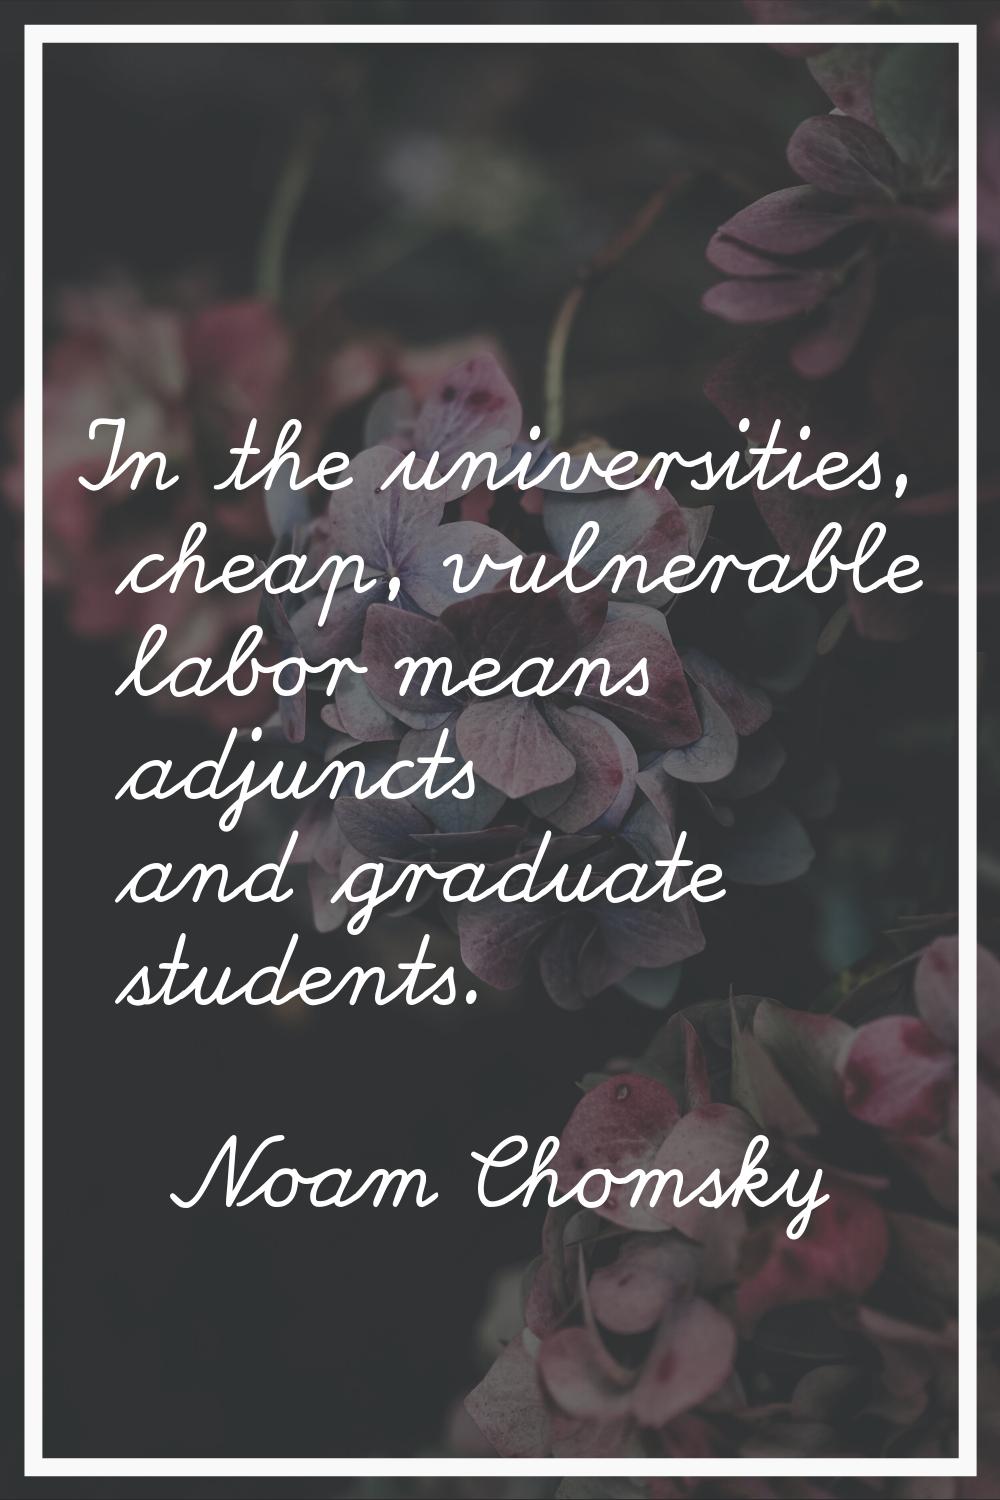 In the universities, cheap, vulnerable labor means adjuncts and graduate students.